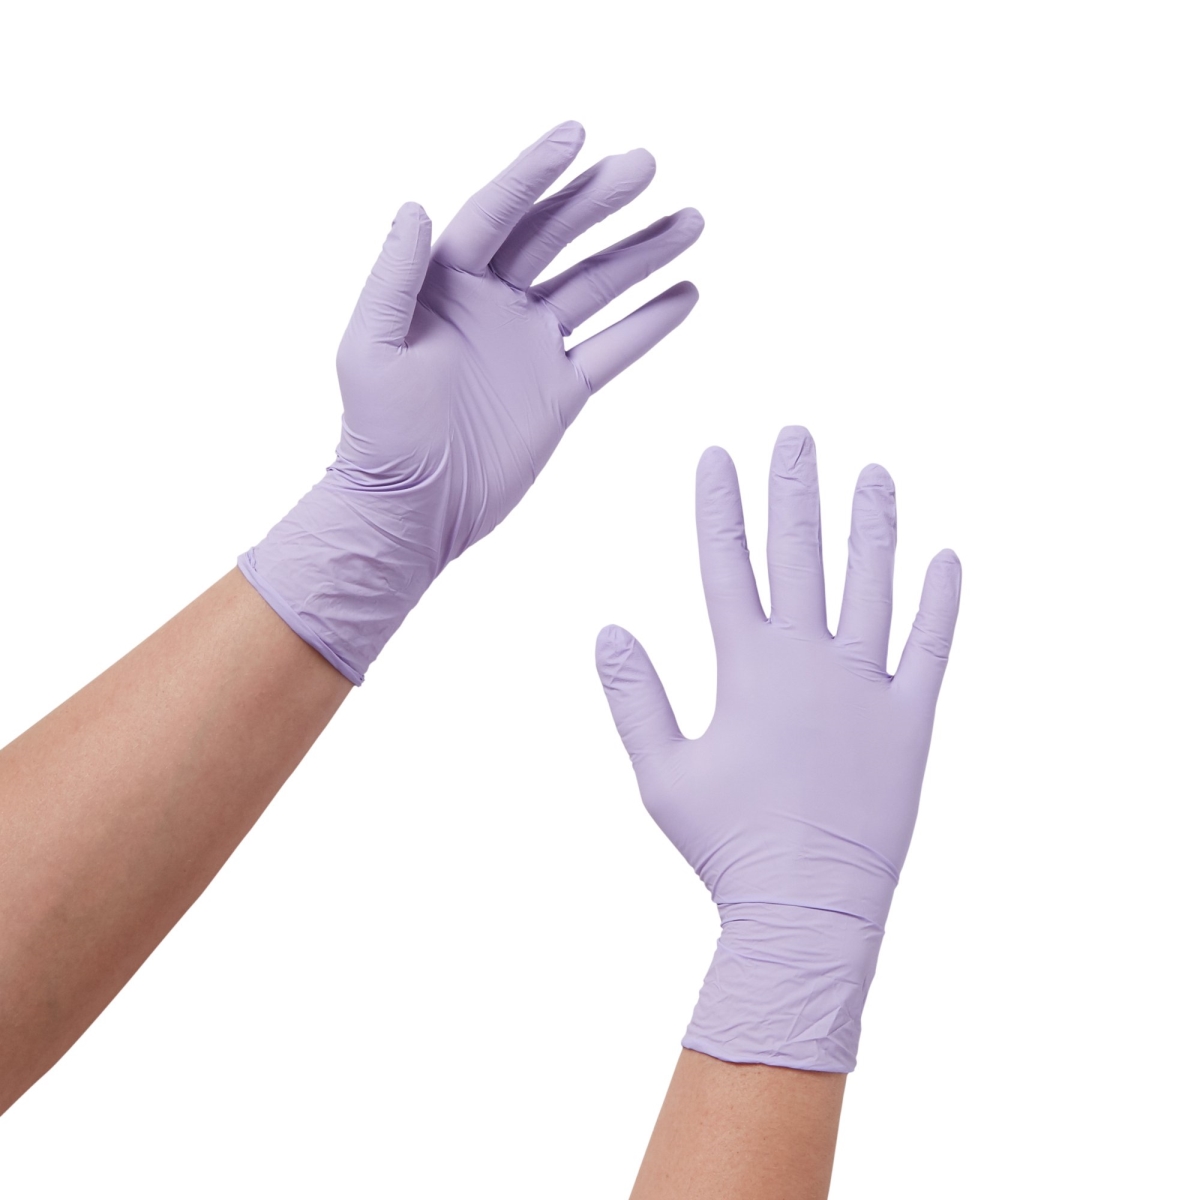 28201310 Lavender 9.5 in. Extra Large Nitrile Exam Glove, Pack of 230 -  O & M HALYARD, 695803_BX